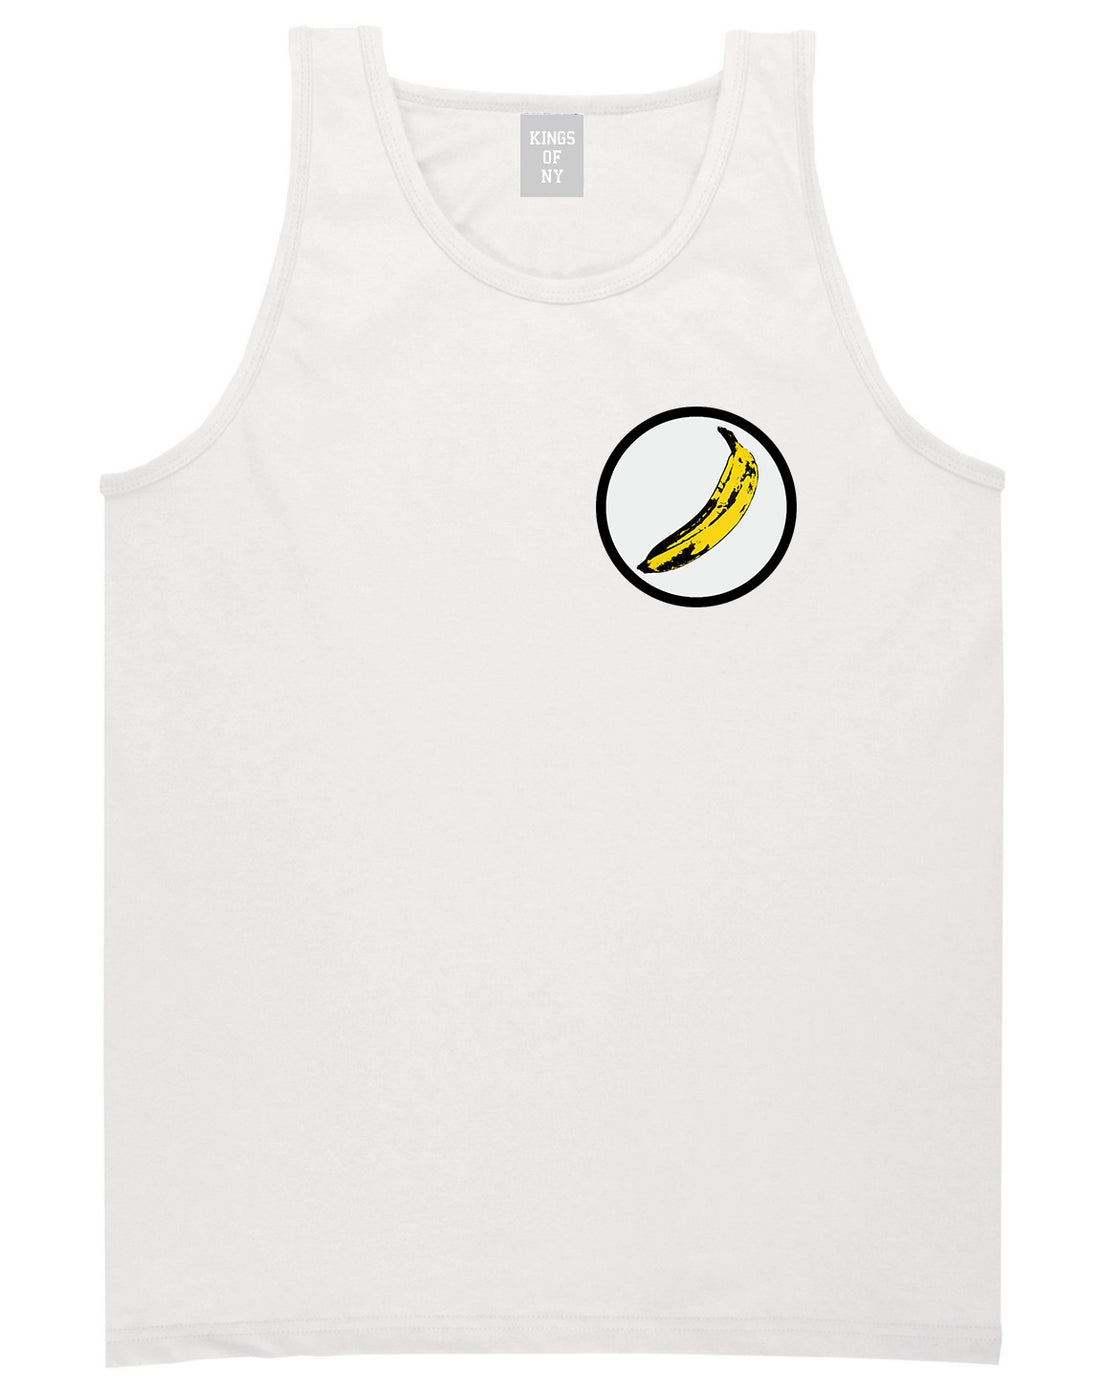 Banana Chest White Tank Top Shirt by Kings Of NY